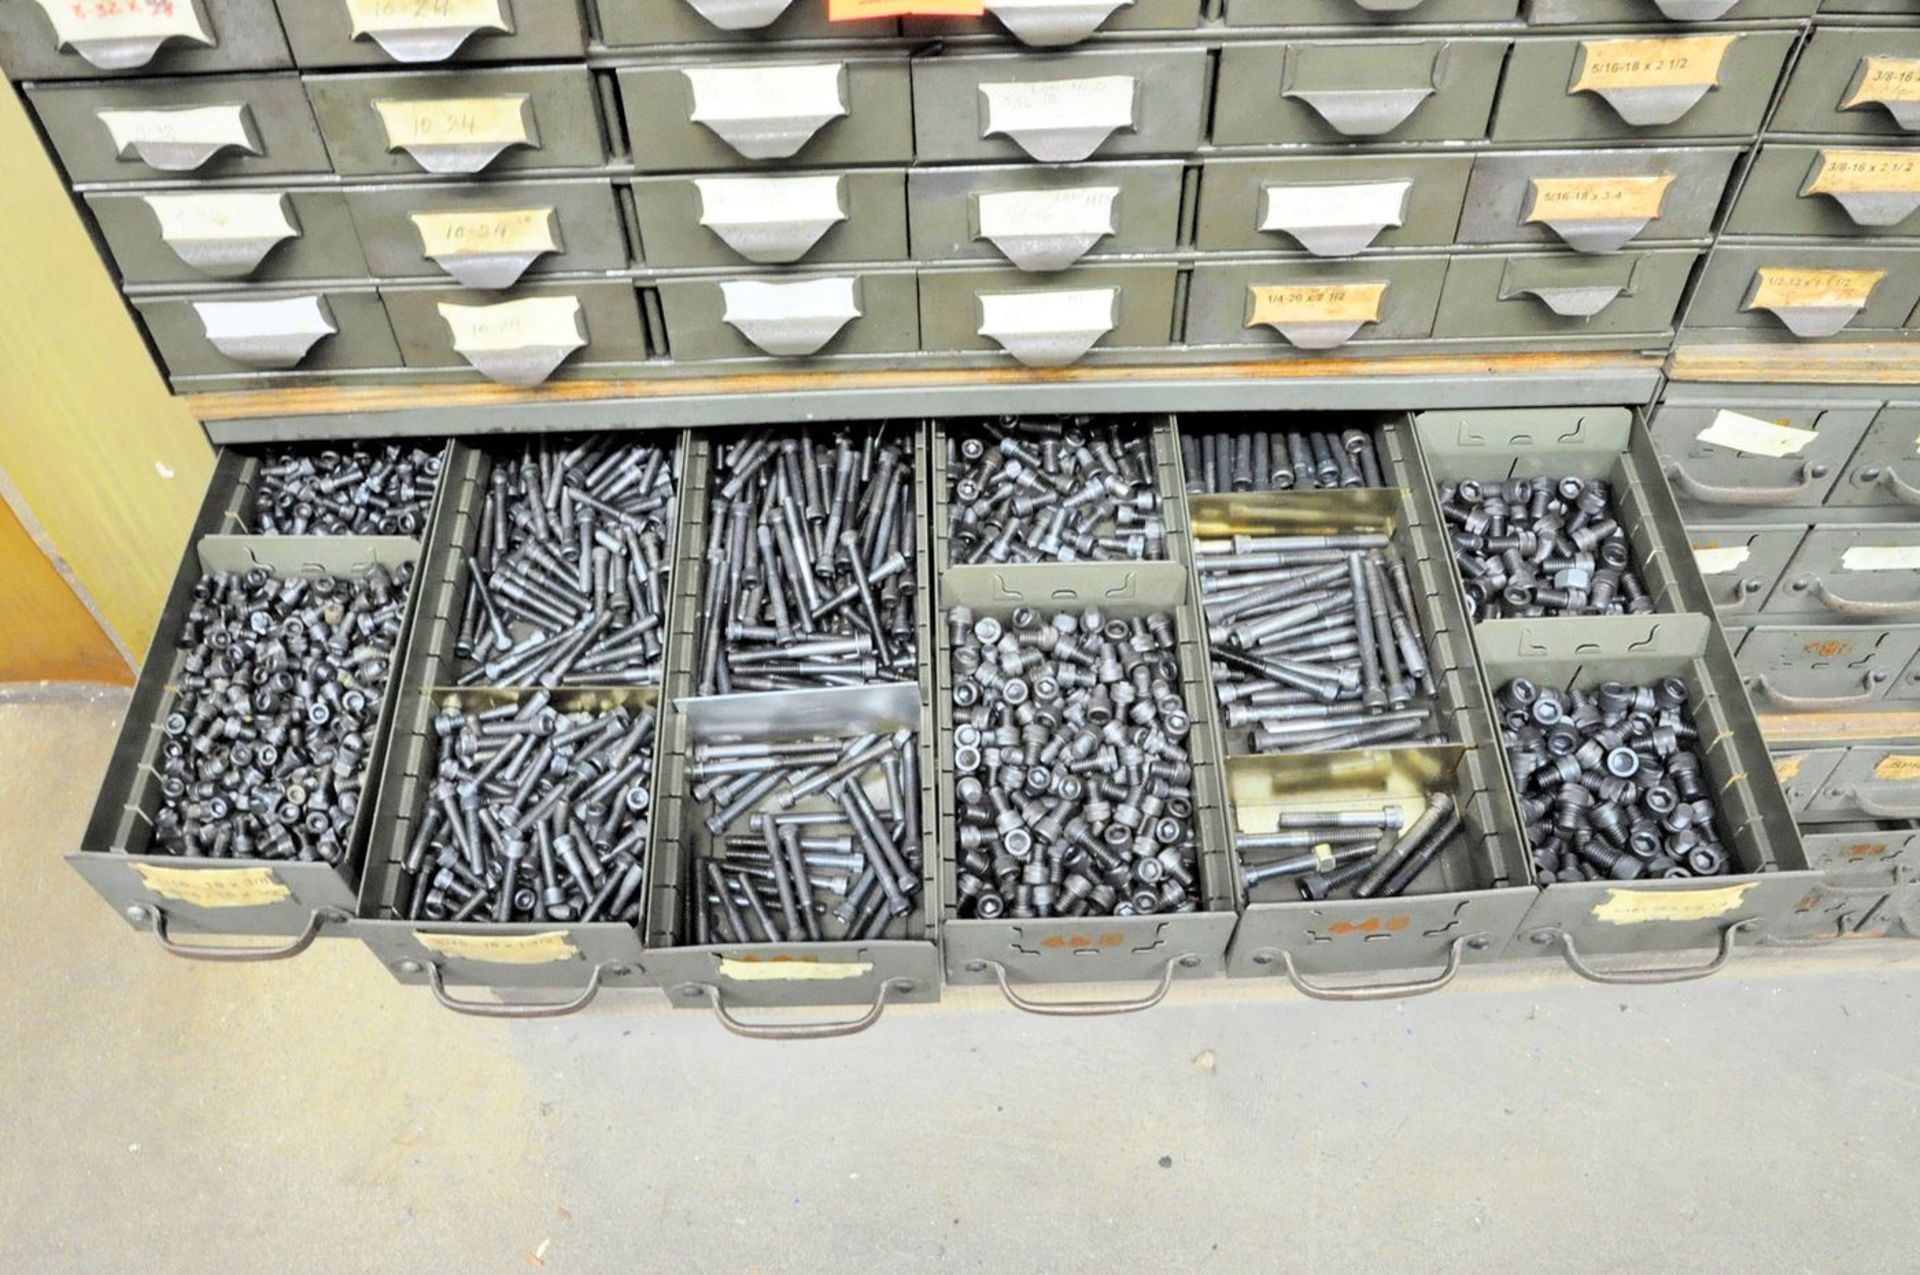 Lot - (84) Organizer Bins with Bolt and Screw Hardware Contents - Image 10 of 15